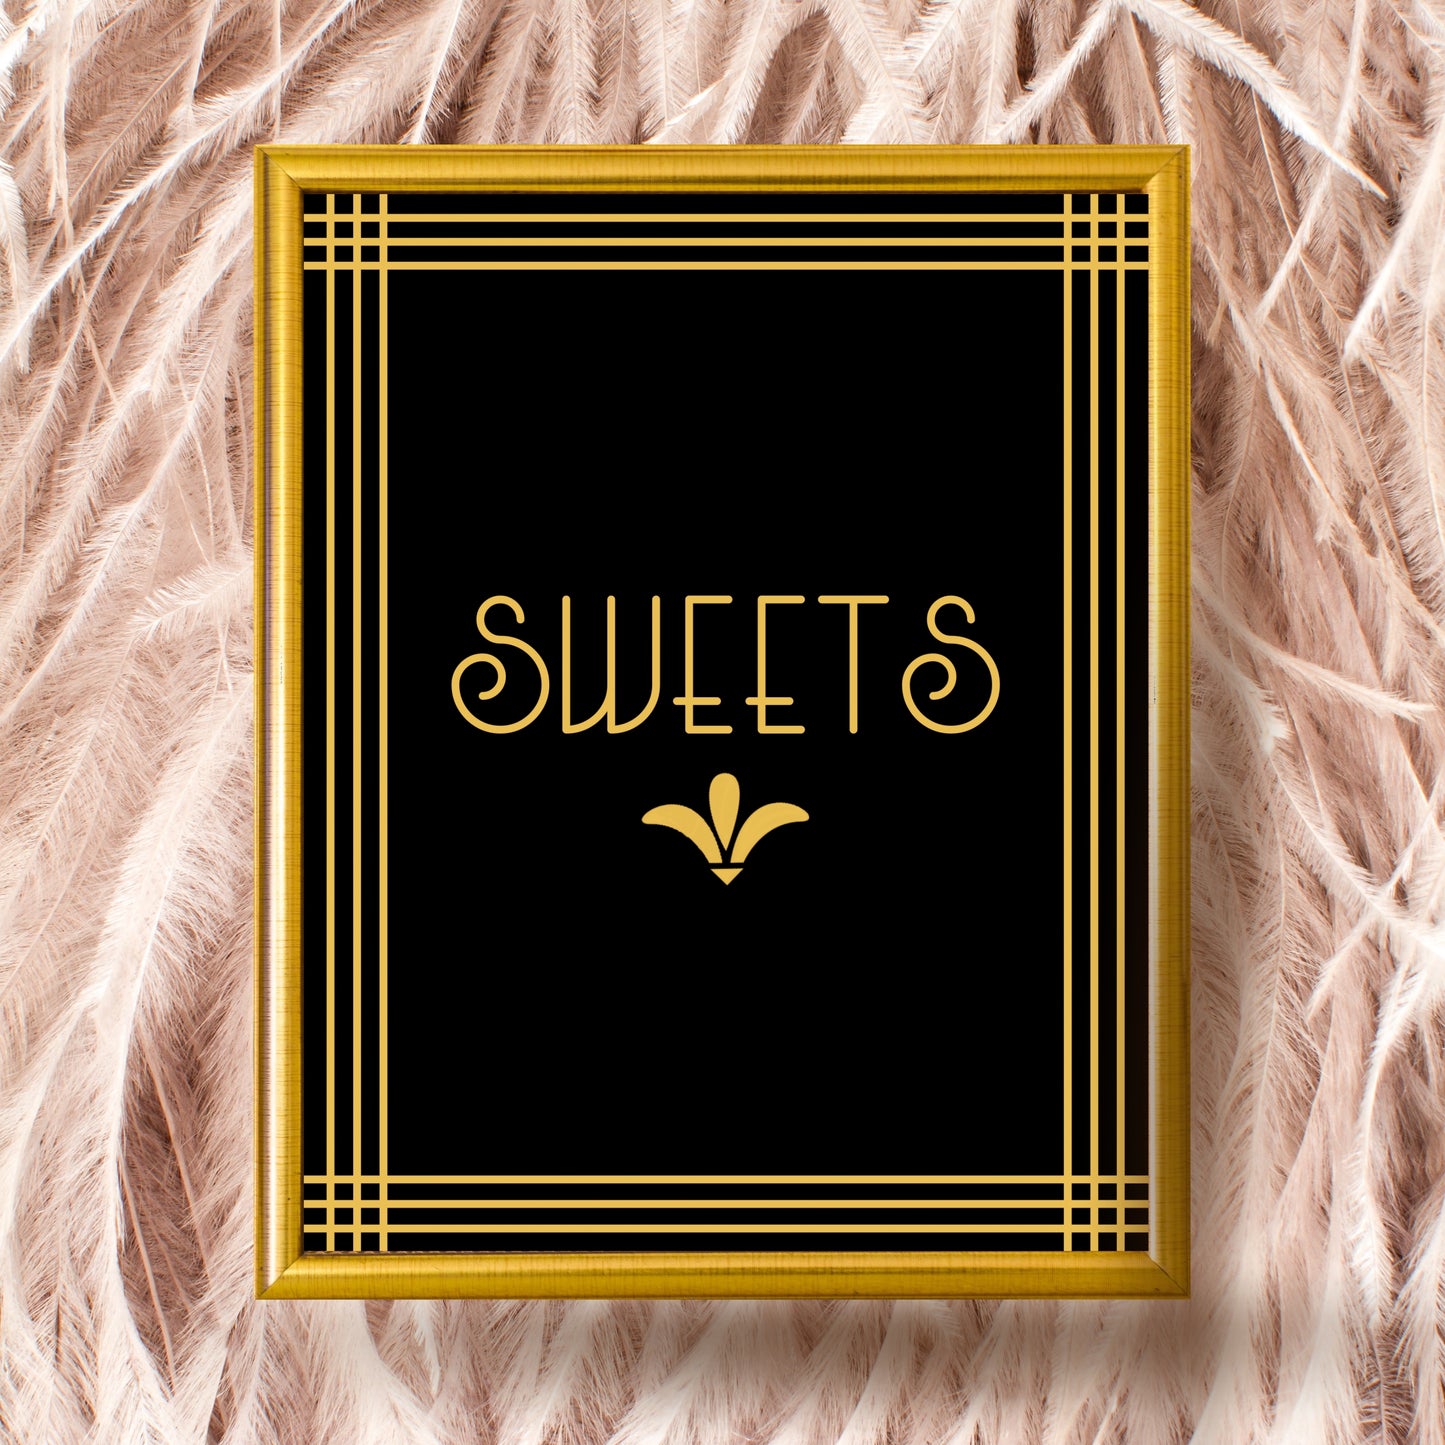 "Sweets" Printable Party Sign For Great Gatsby Or Roaring 20's Party Or Wedding, Black & Gold, Printable Party Decor